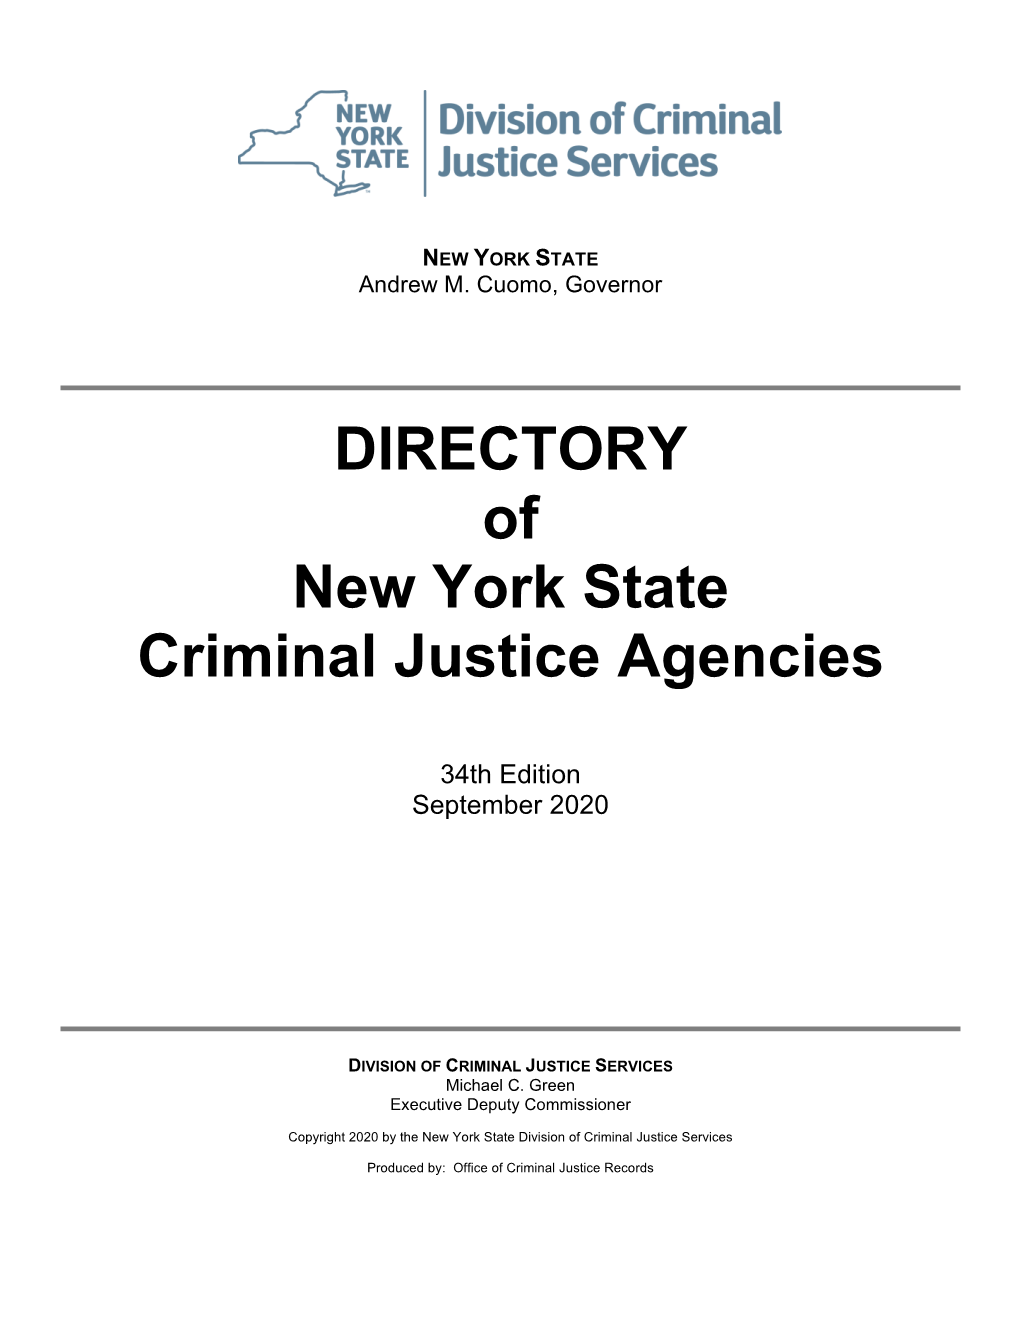 DIRECTORY of New York State Criminal Justice Agencies